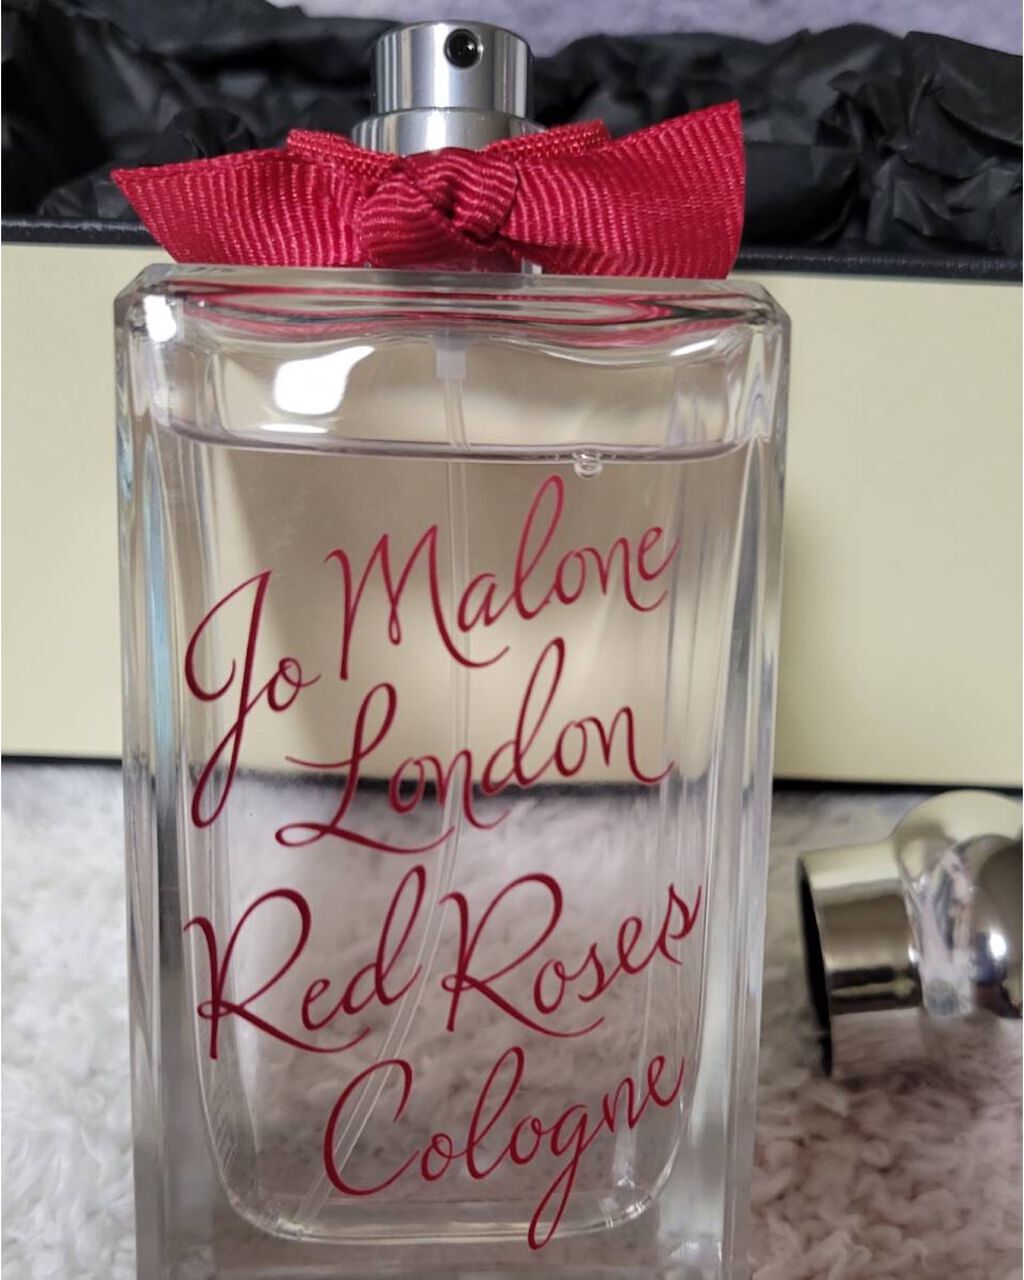 ♡Jo MALONE Red Roses Cologne♡